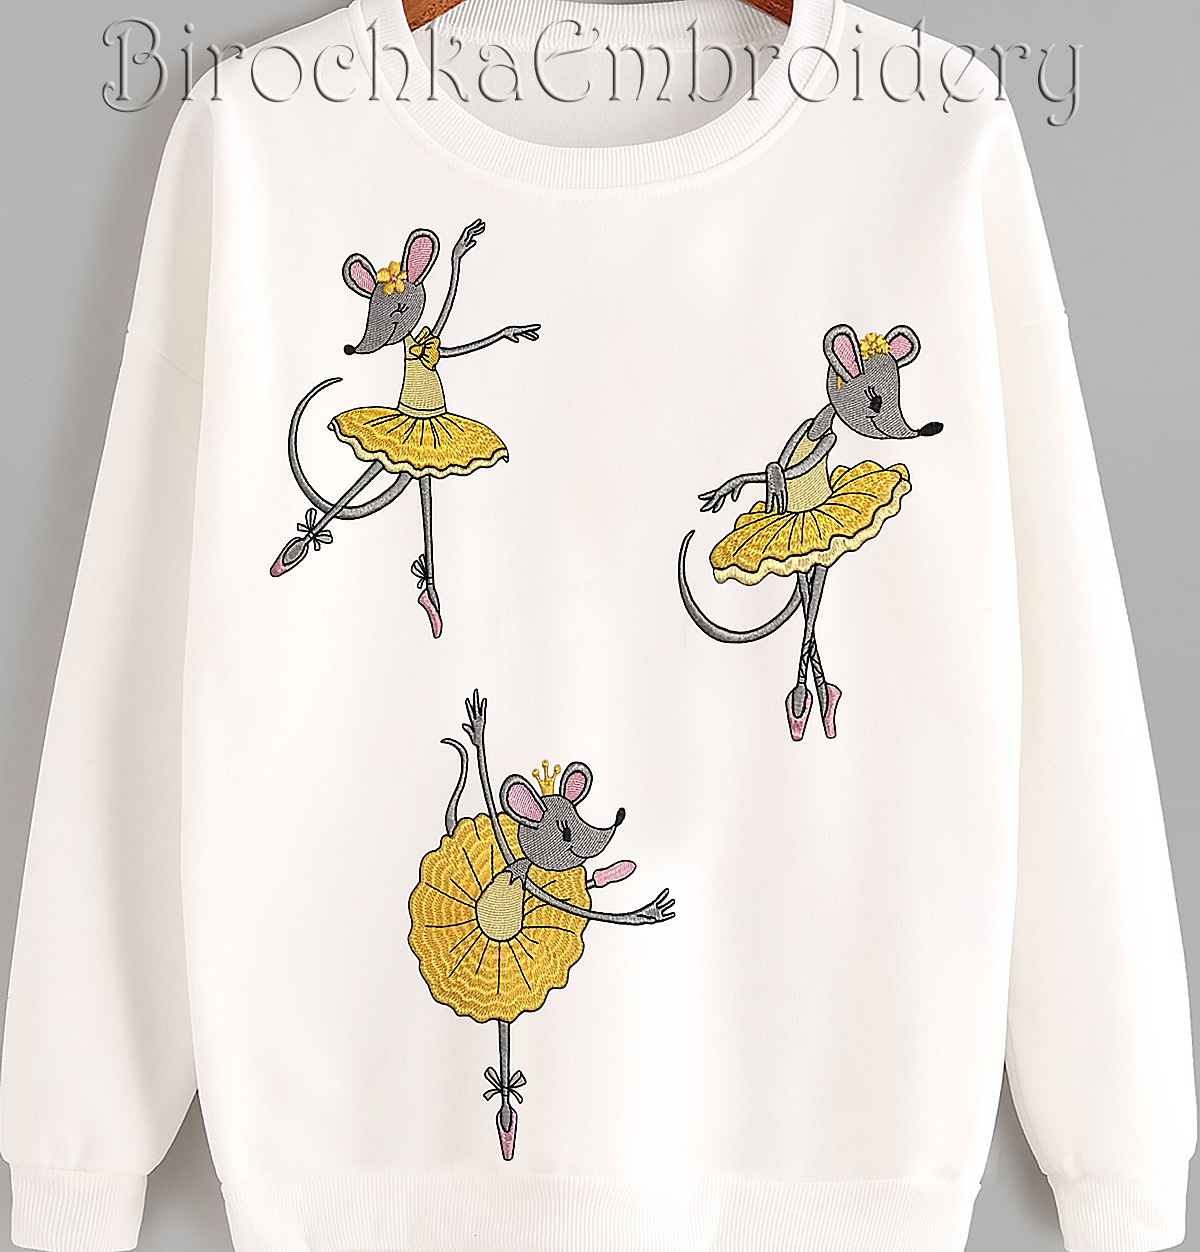 mouses embroidery designs z.jpg